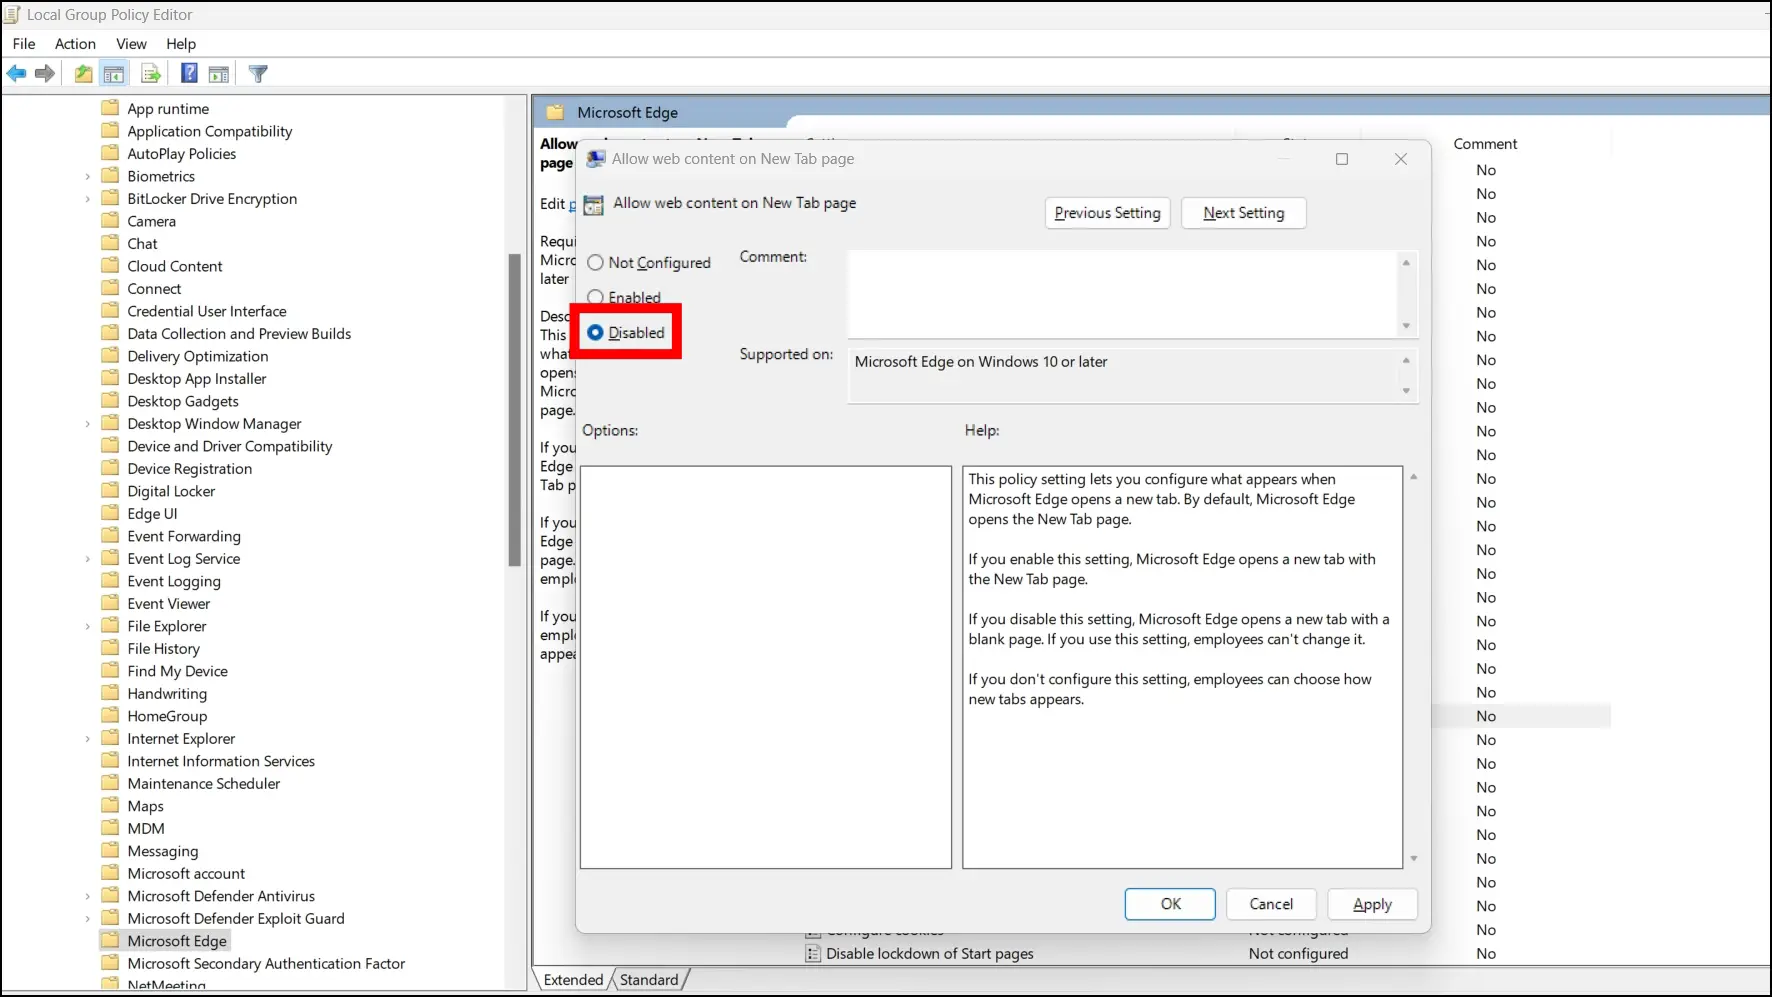 Remove Web Content on New Tabs To Tweak Edge Using Group Policy Editor in Windows